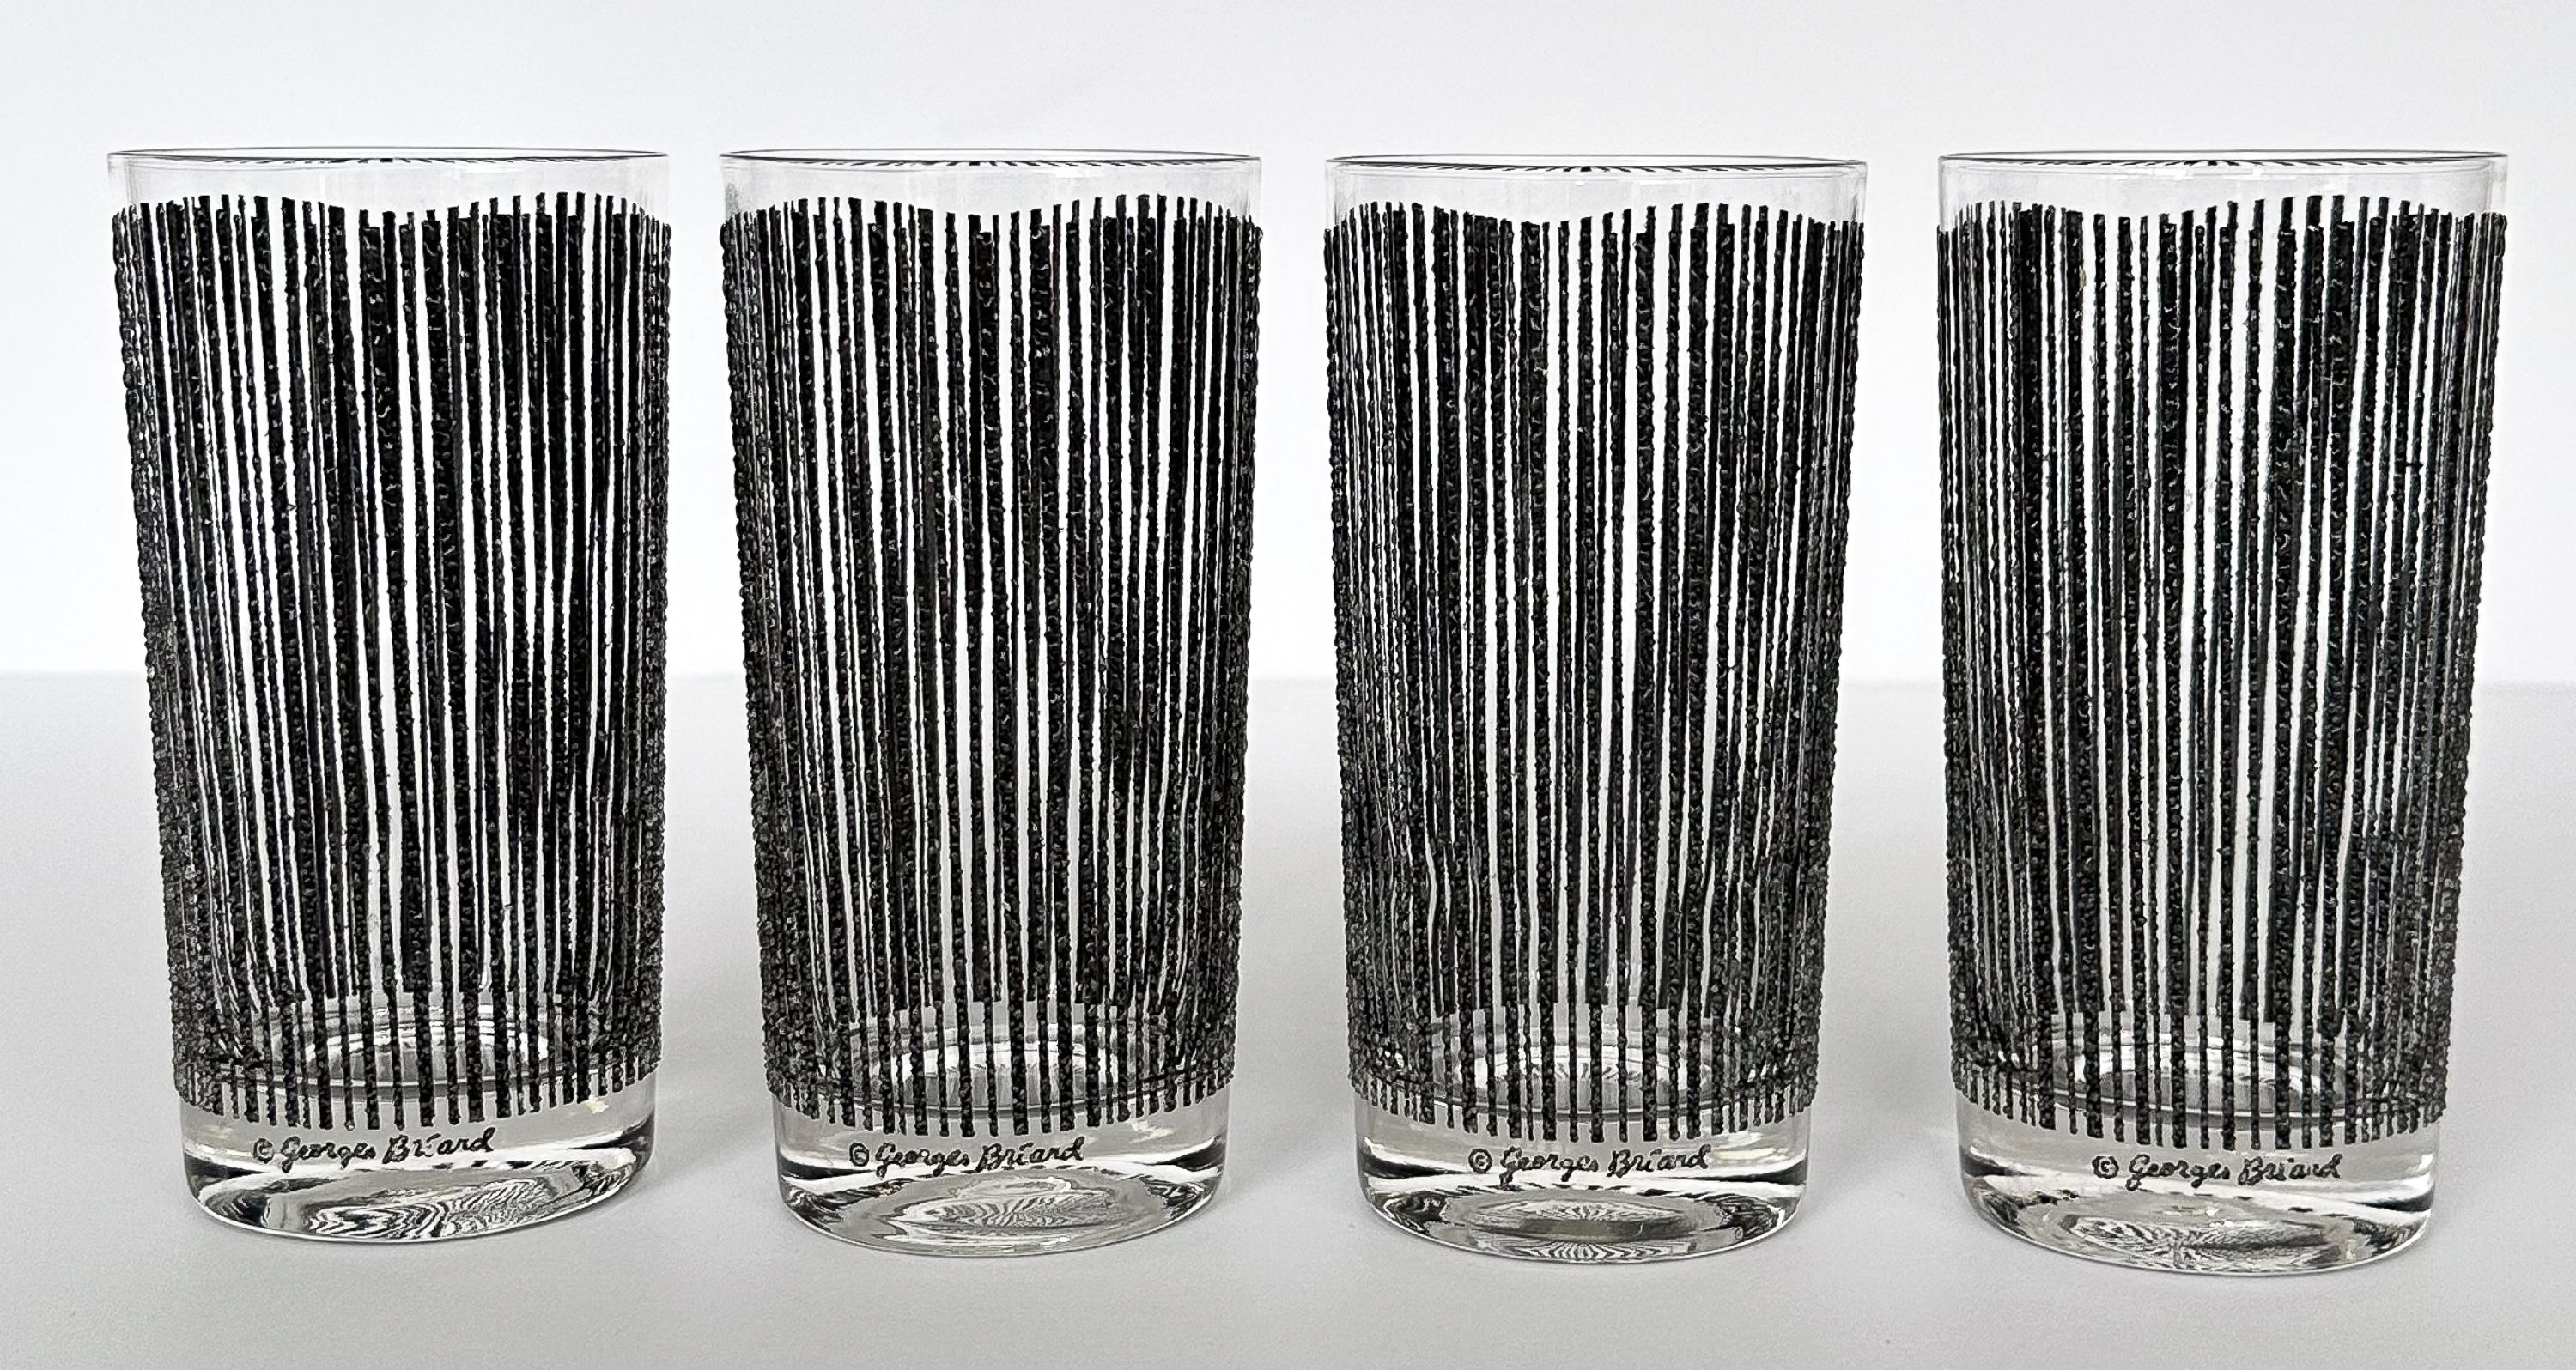 Discover the epitome of cocktail sophistication with this set of four mid-century modern Georges Briard “icicle” pattern highball glasses in black. The 